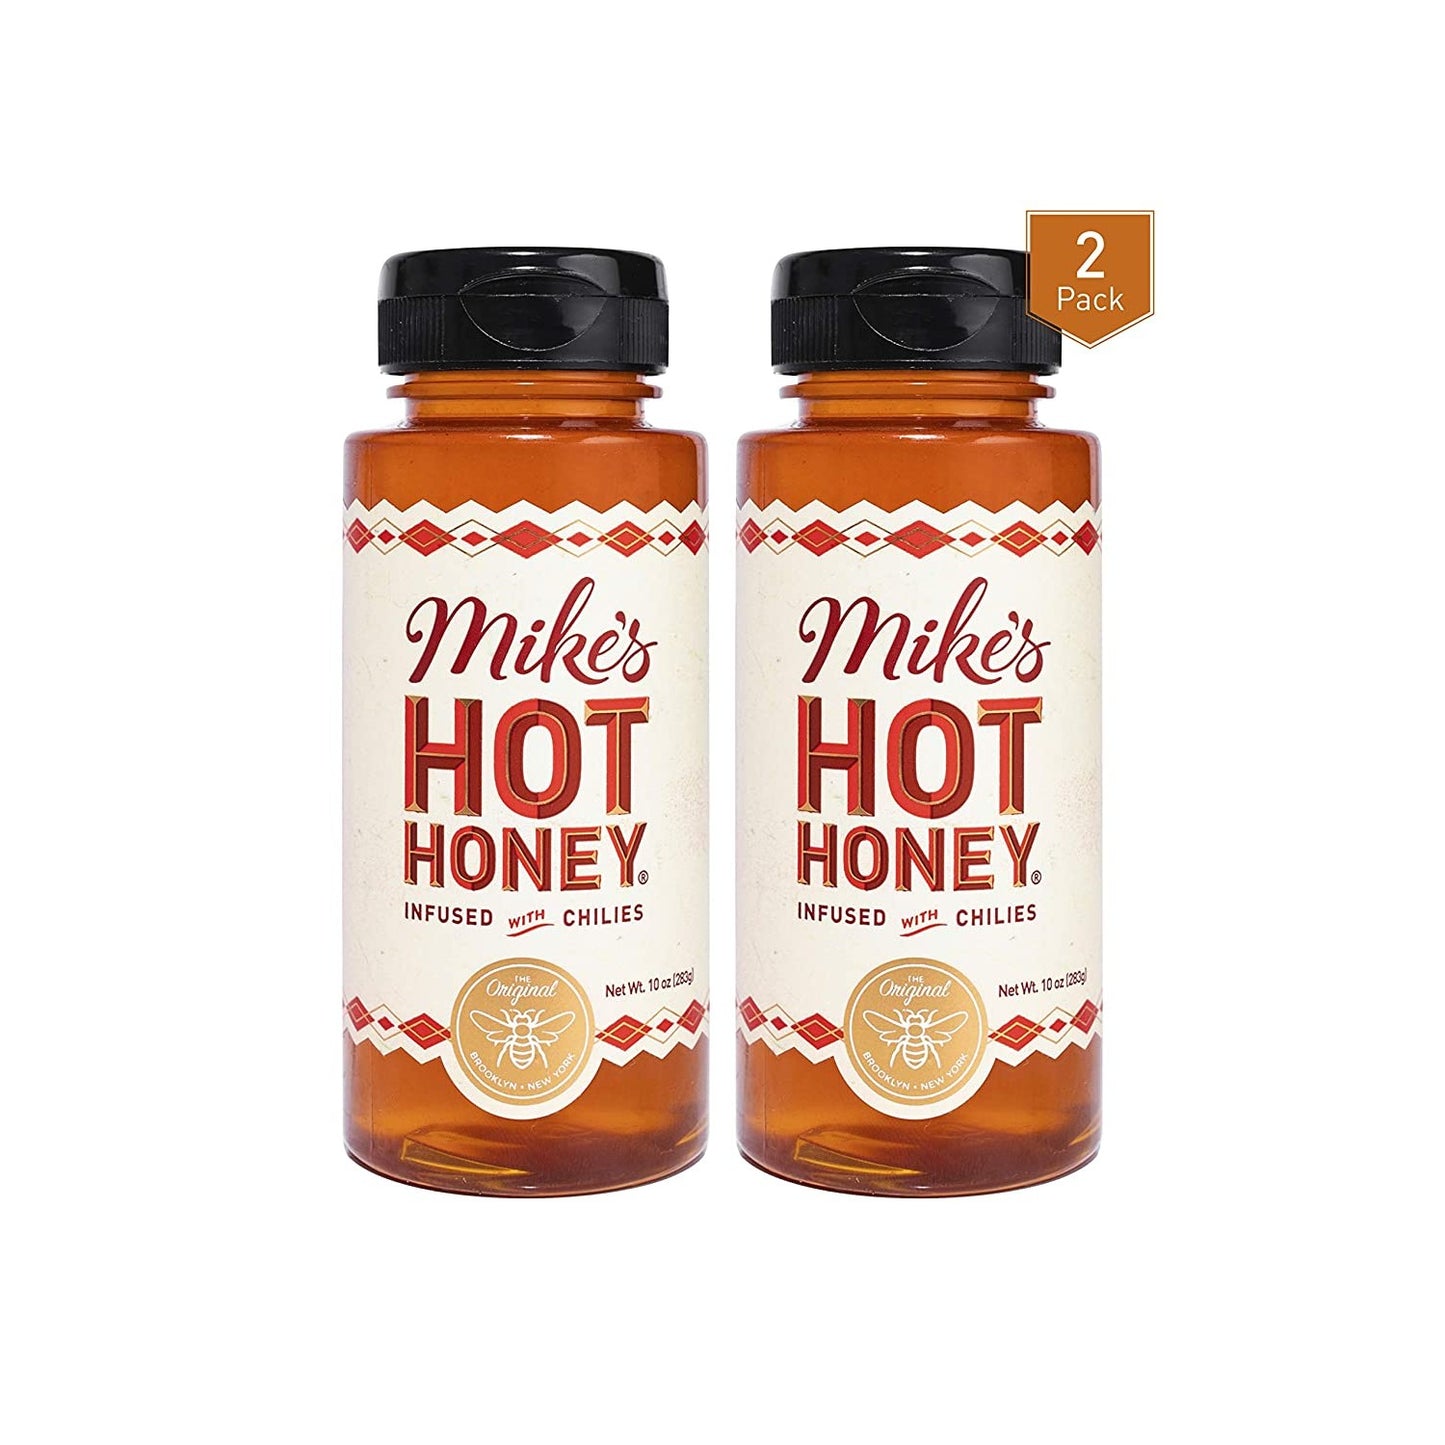 Two glass jars of Mike's hot honey.